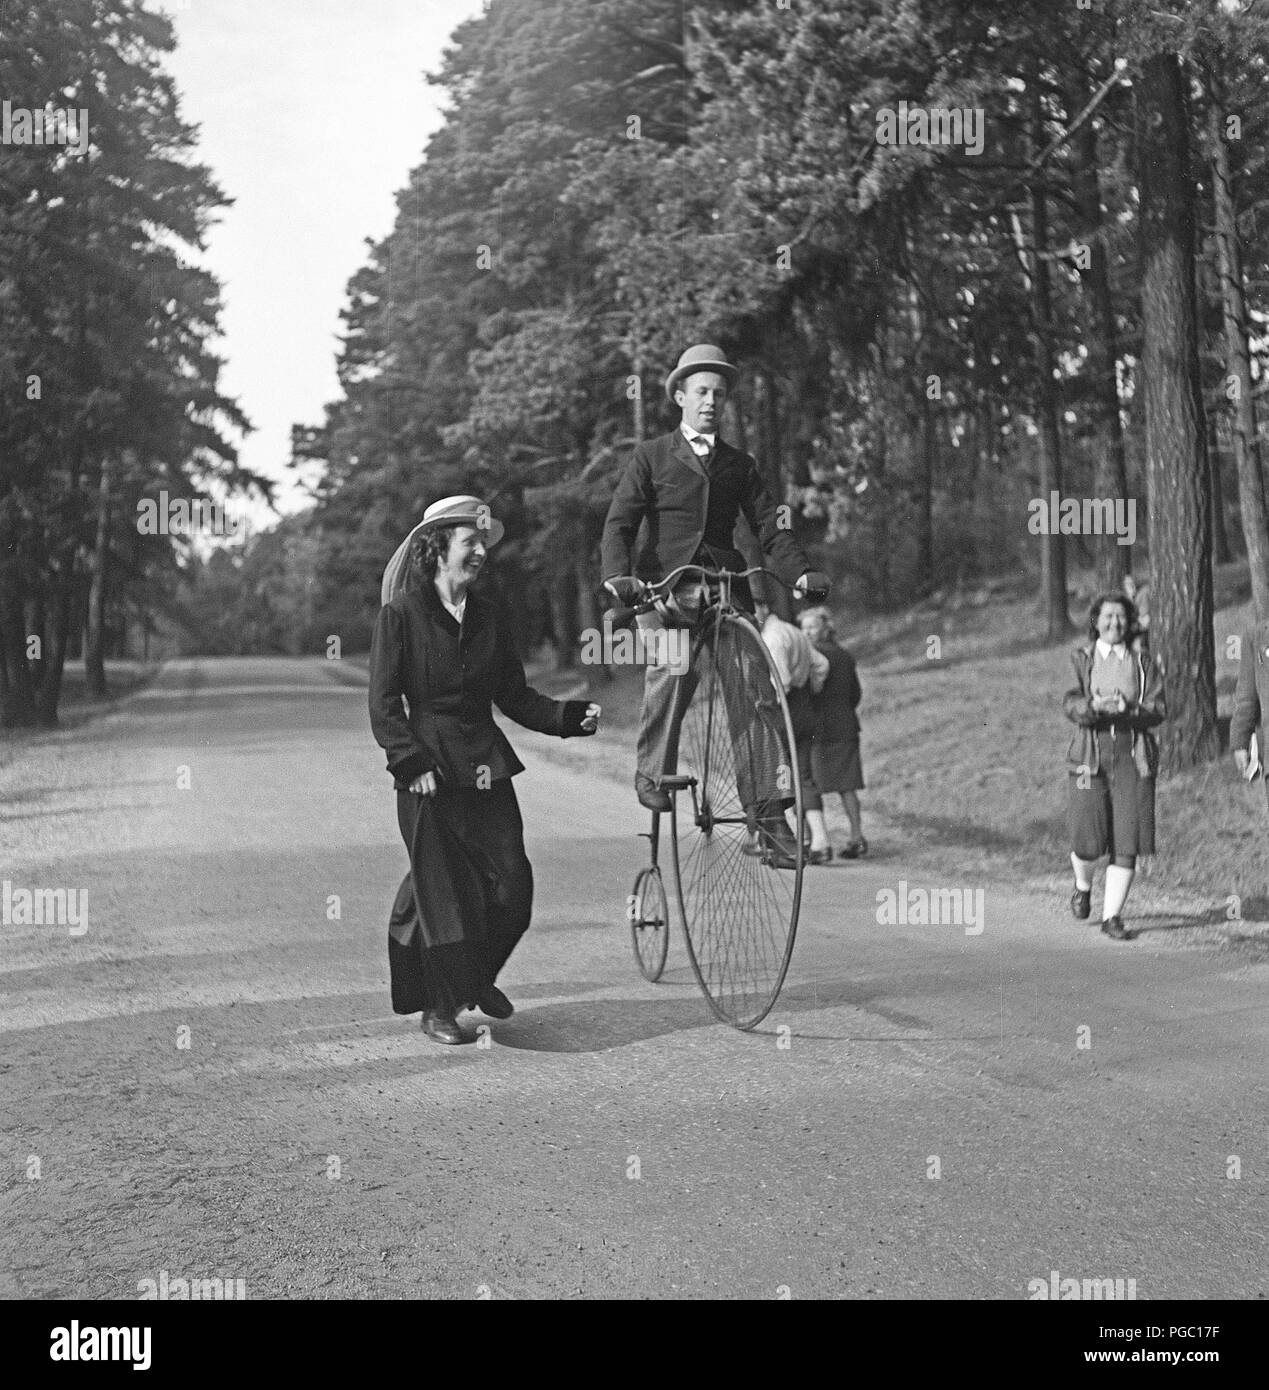 Penny farthing bicycle. A man is riding a penny-farthing bicycle and a woman is running by his side as if she is afraid he will fall. Sweden 1944 Photo Kristoffersson K131-2 Stock Photo